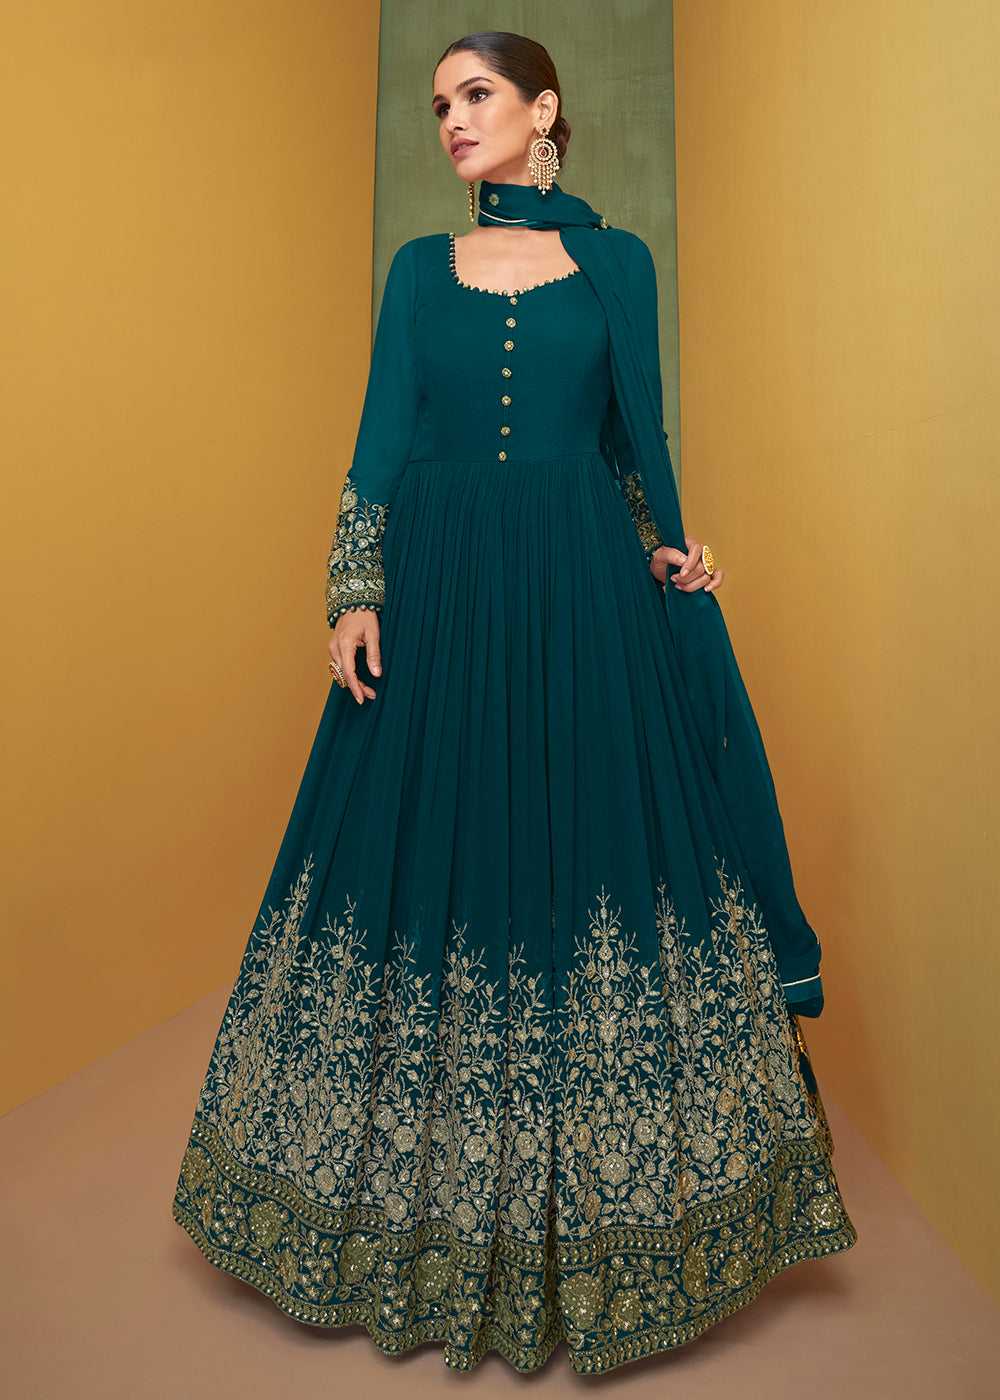 Buy Now Appealing Teal Blue Wedding Embroidered Bridal Anarkali Gown Online in USA, UK, Australia, New Zealand, Canada & Worldwide at Empress Clothing. 